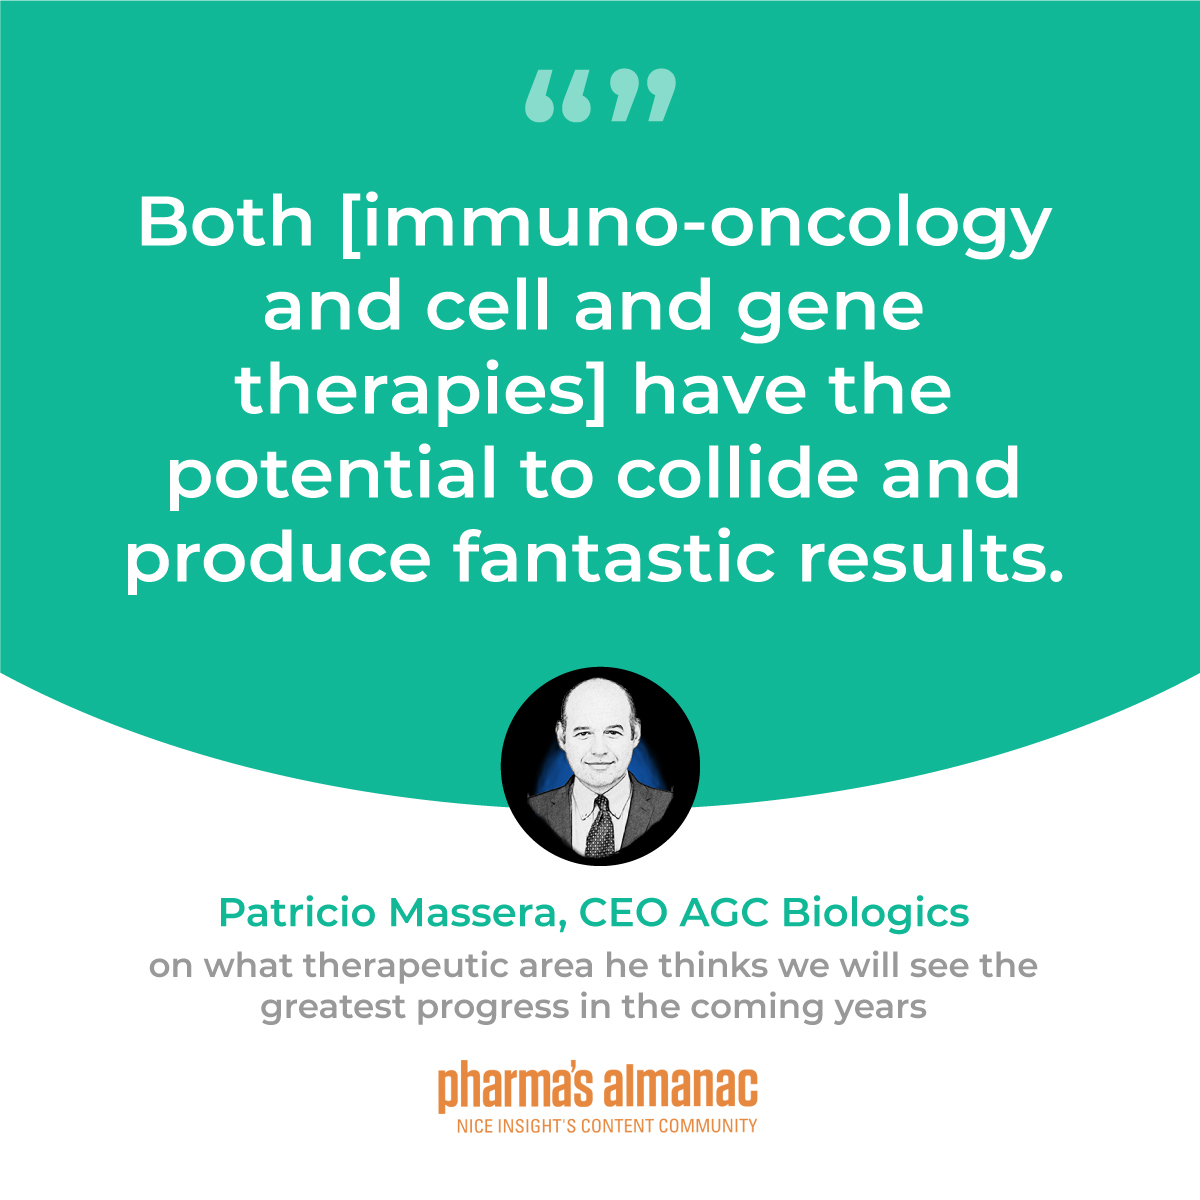 Patricia Massera quote: Both immuno-oncology and cell and gene therapies have the potential to collide and produce fantastic results.